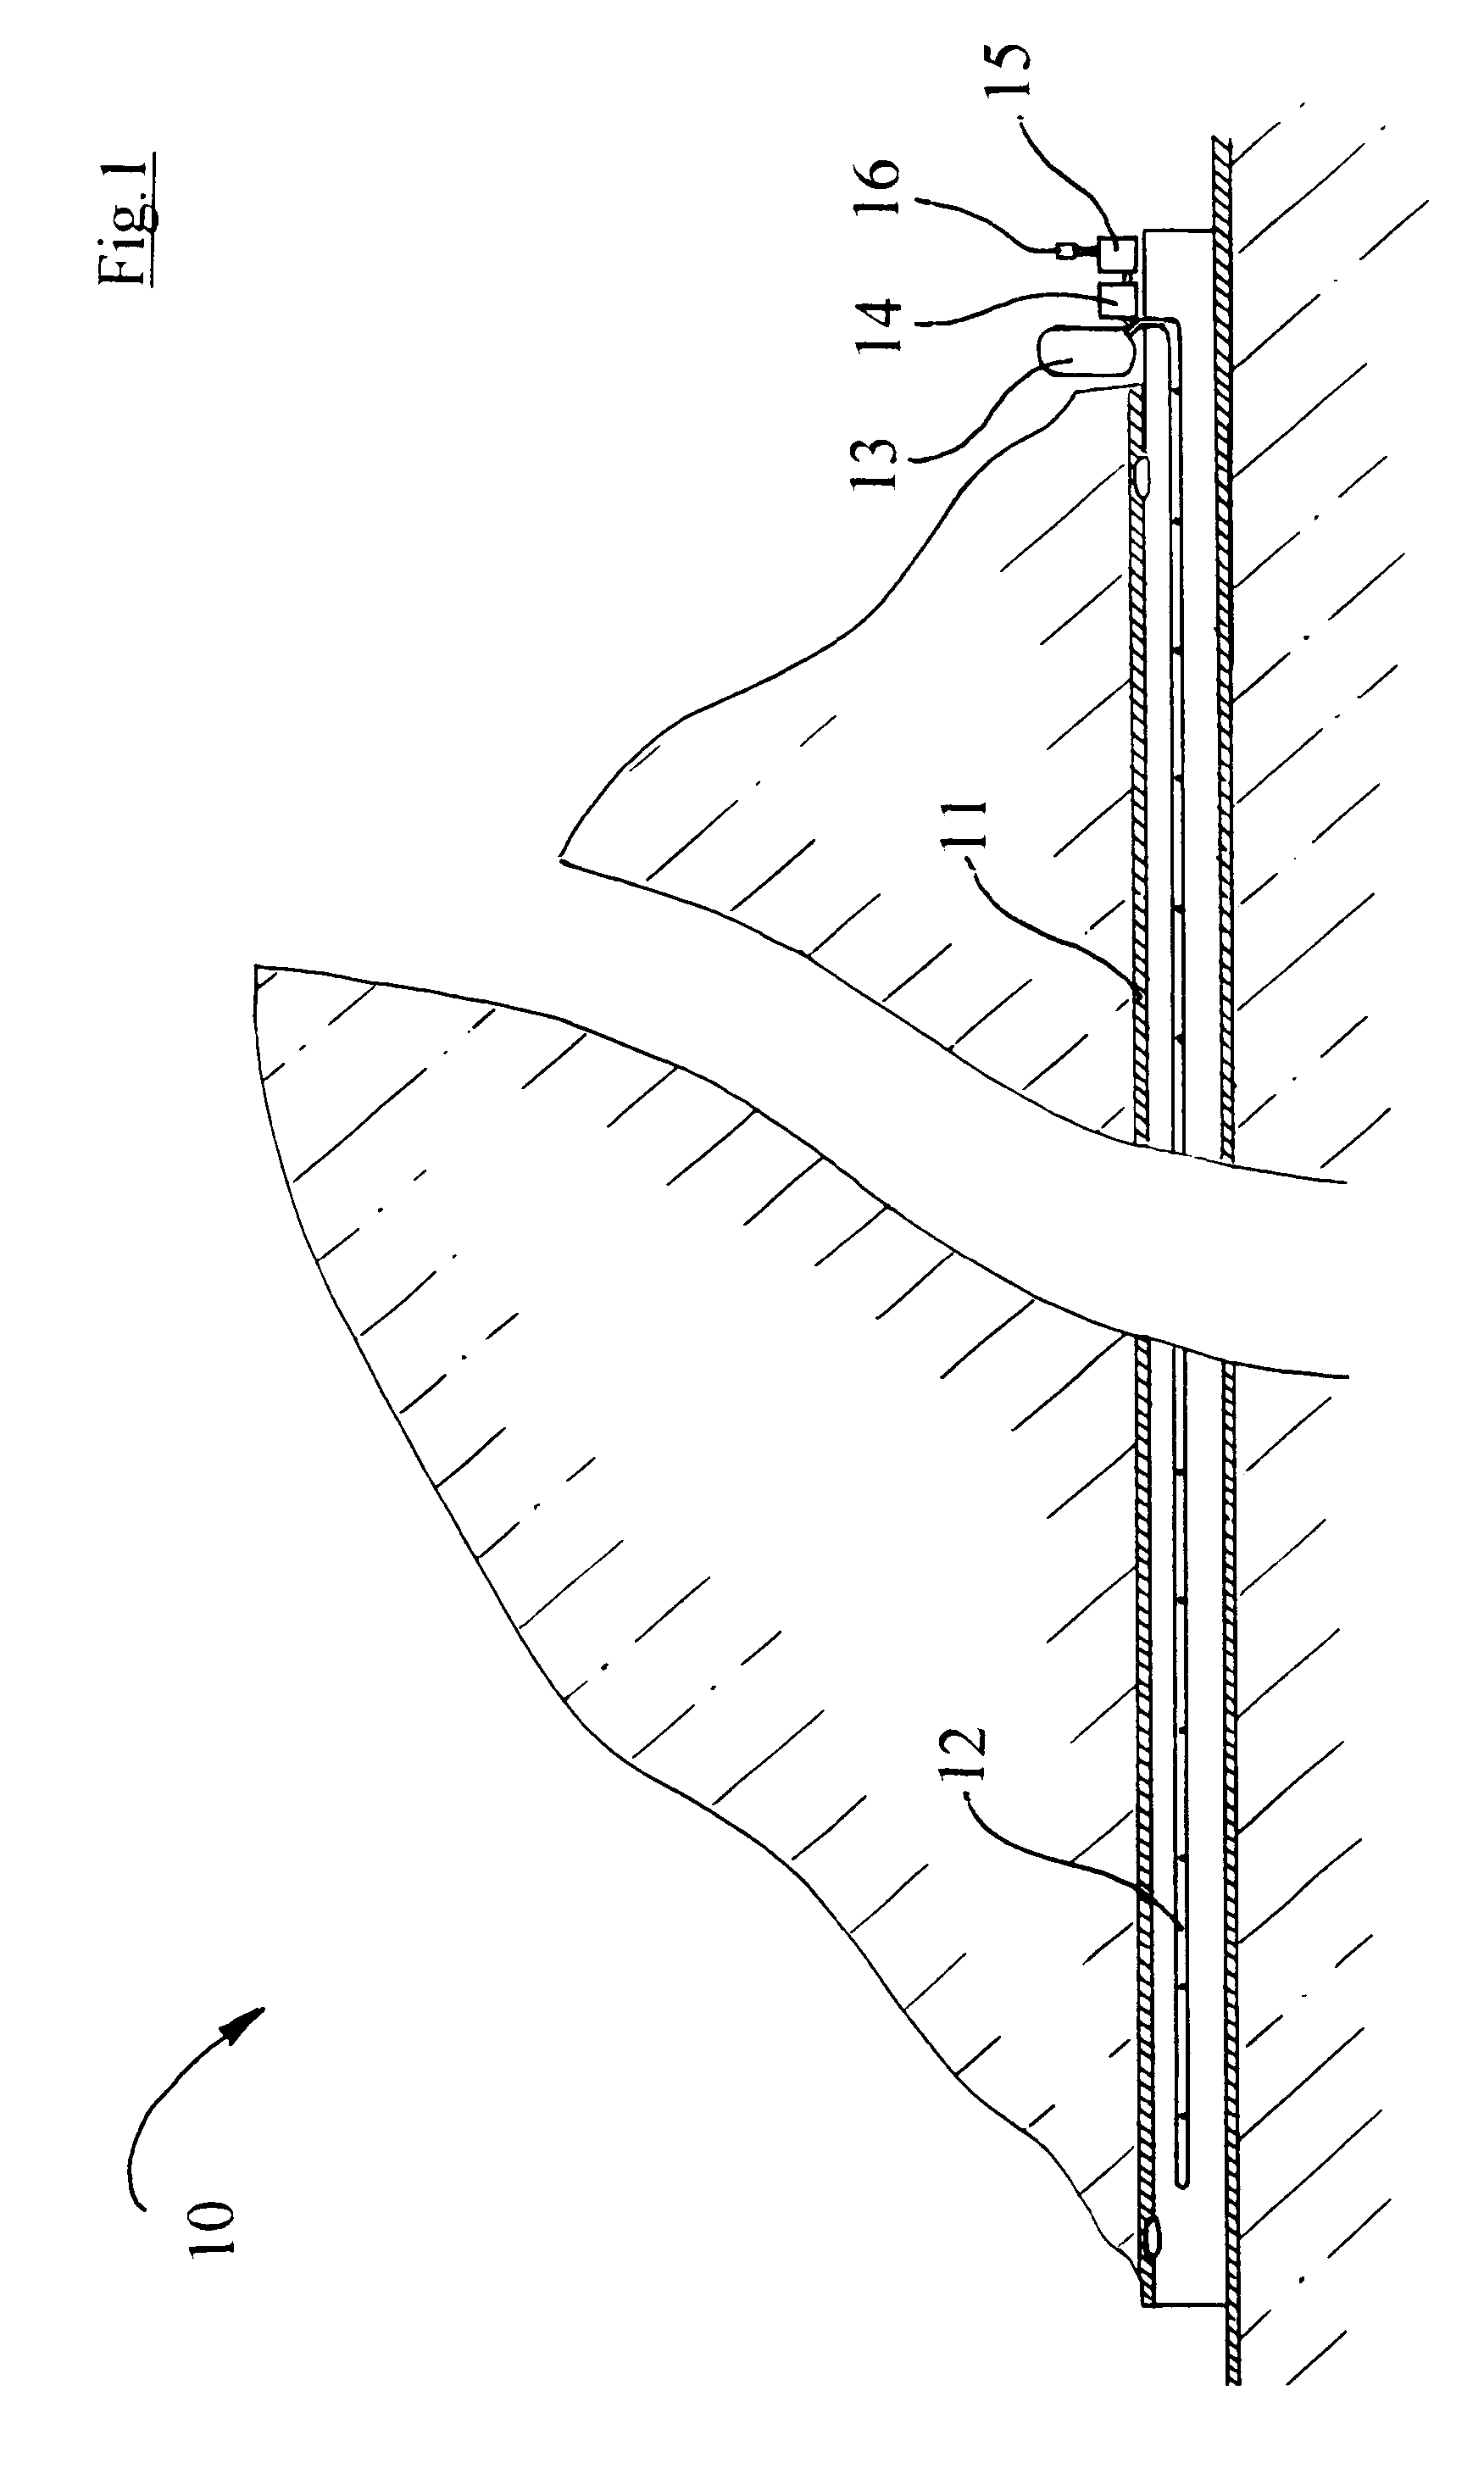 Tunnel fire suppression system and methods for selective delivery of breathable fire suppressant directly to fire site